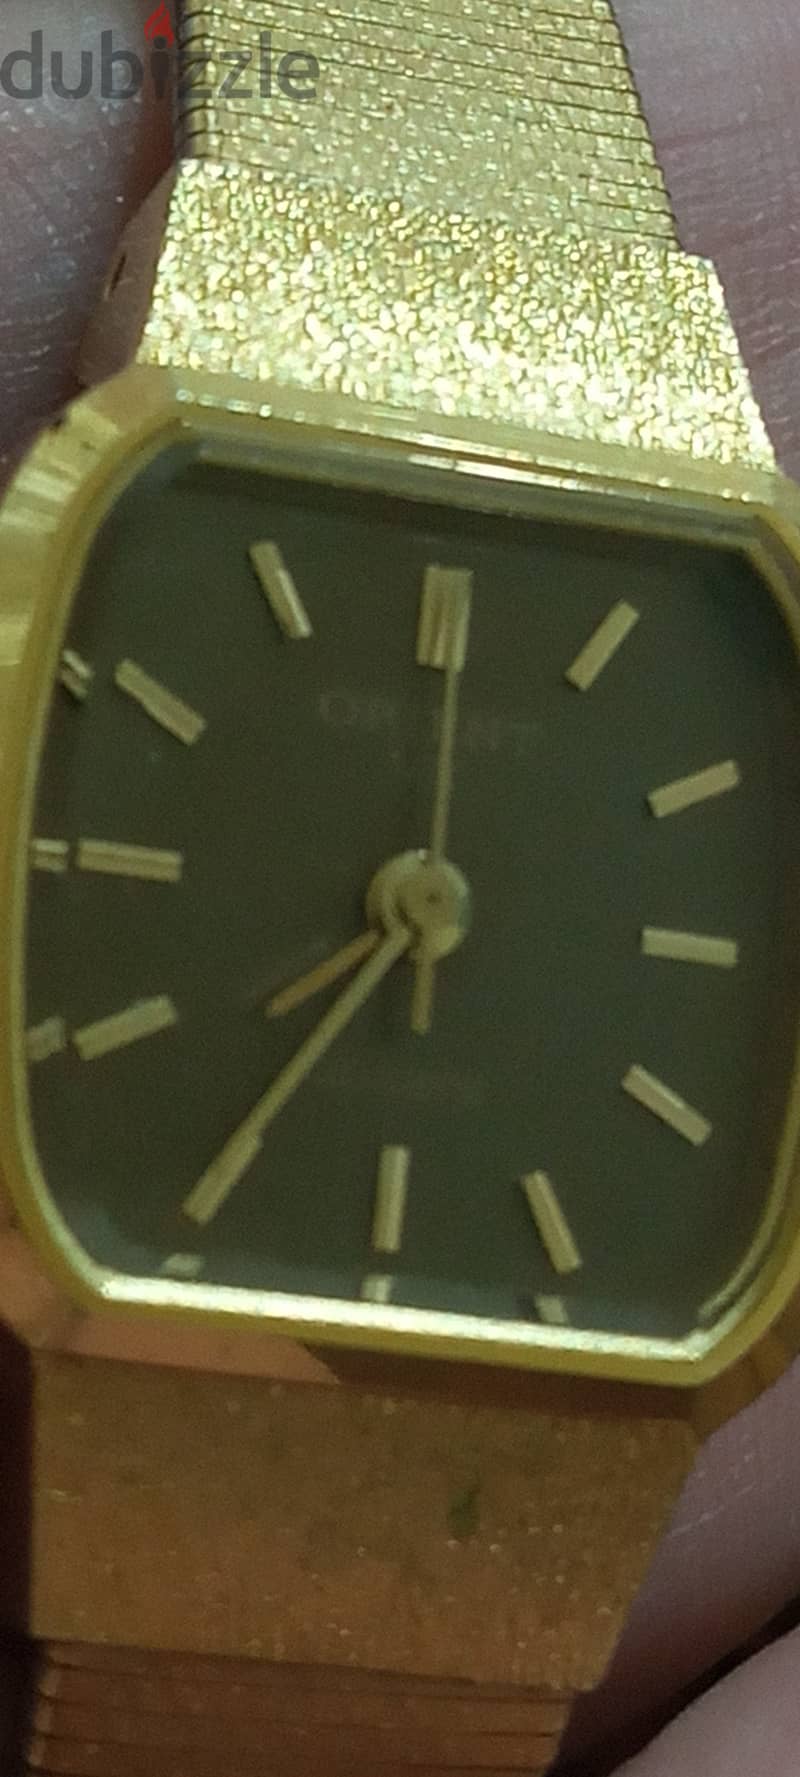 ORIENT MADE IN JAPAN 4